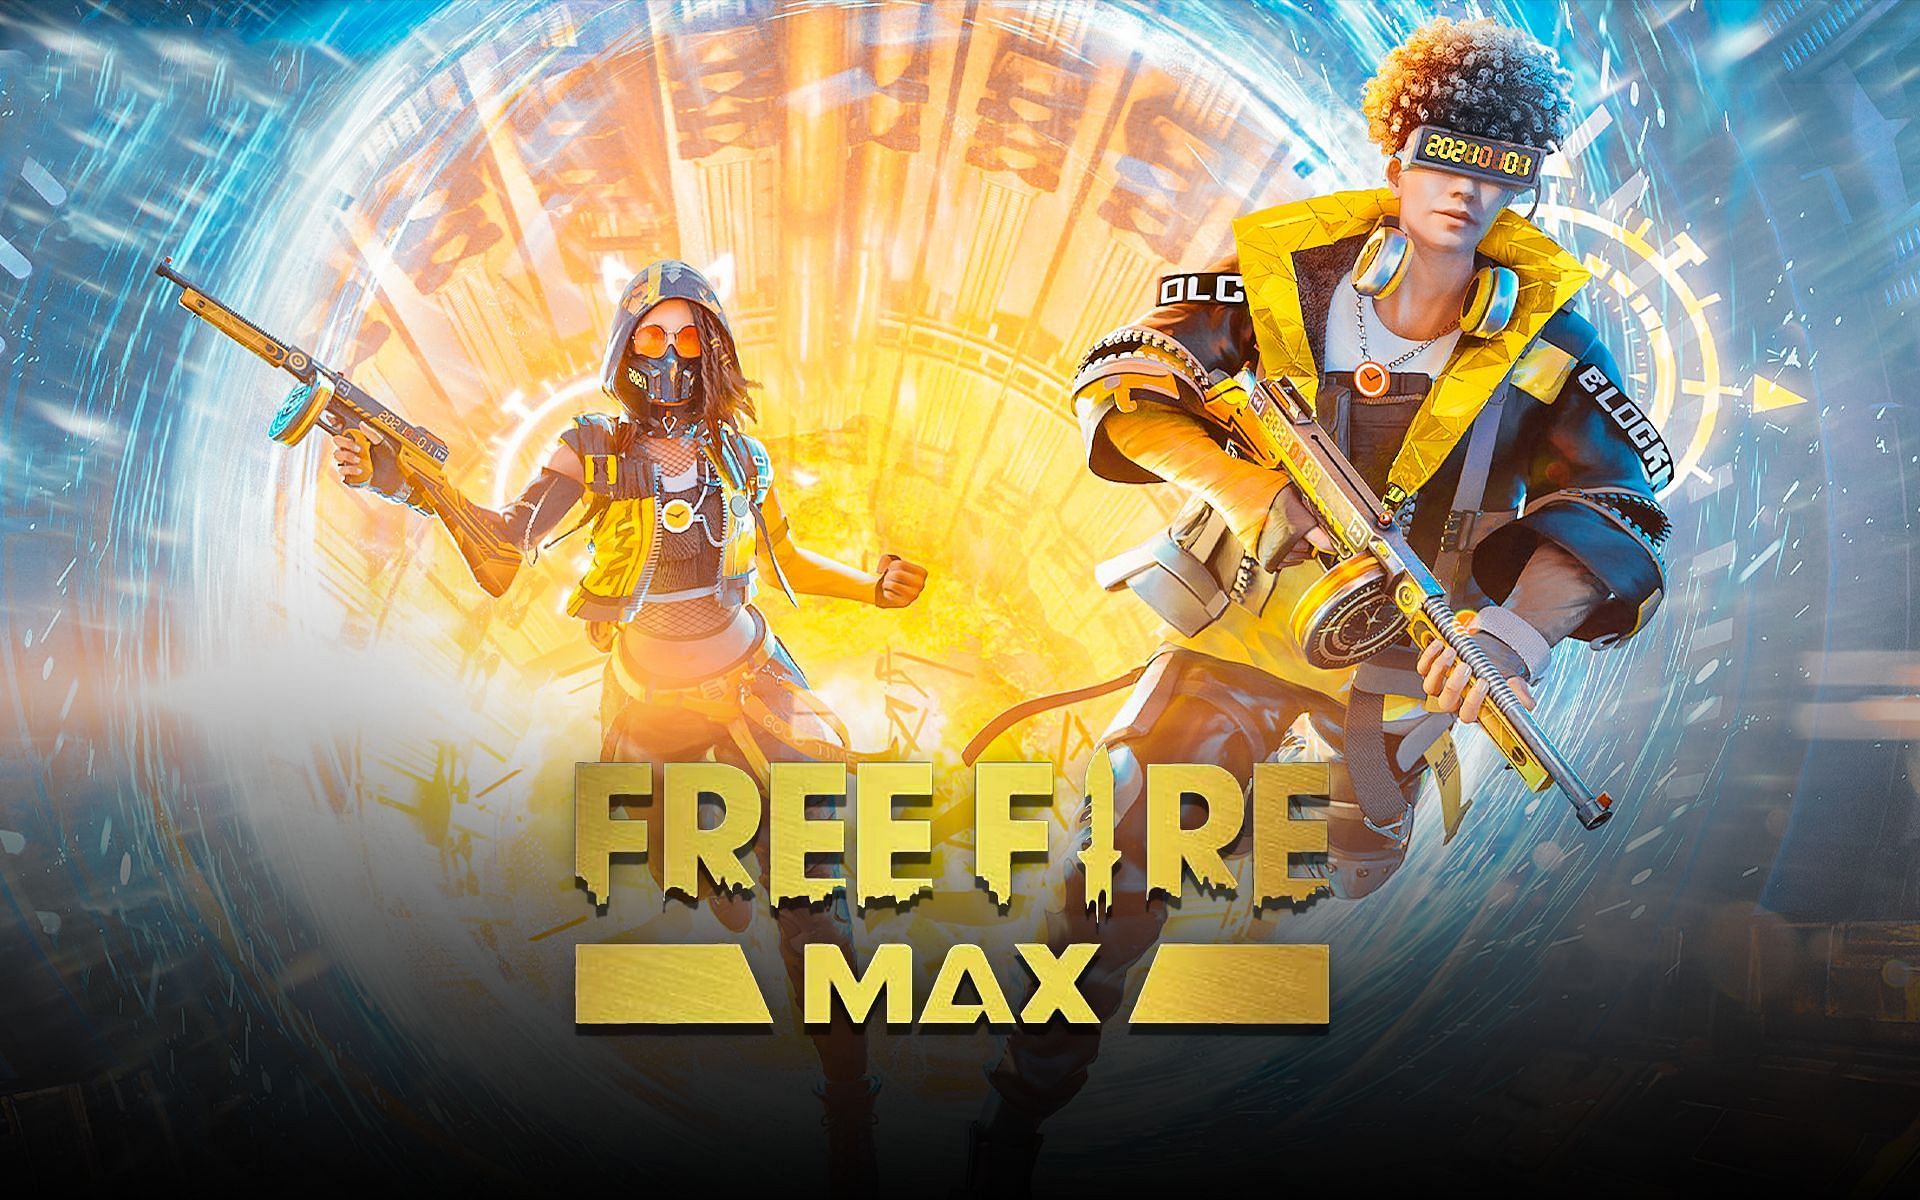 These Free Fire MAX characters are perfect for Clash Squad and ranked modes (Image via Garena Free Fire MAX)